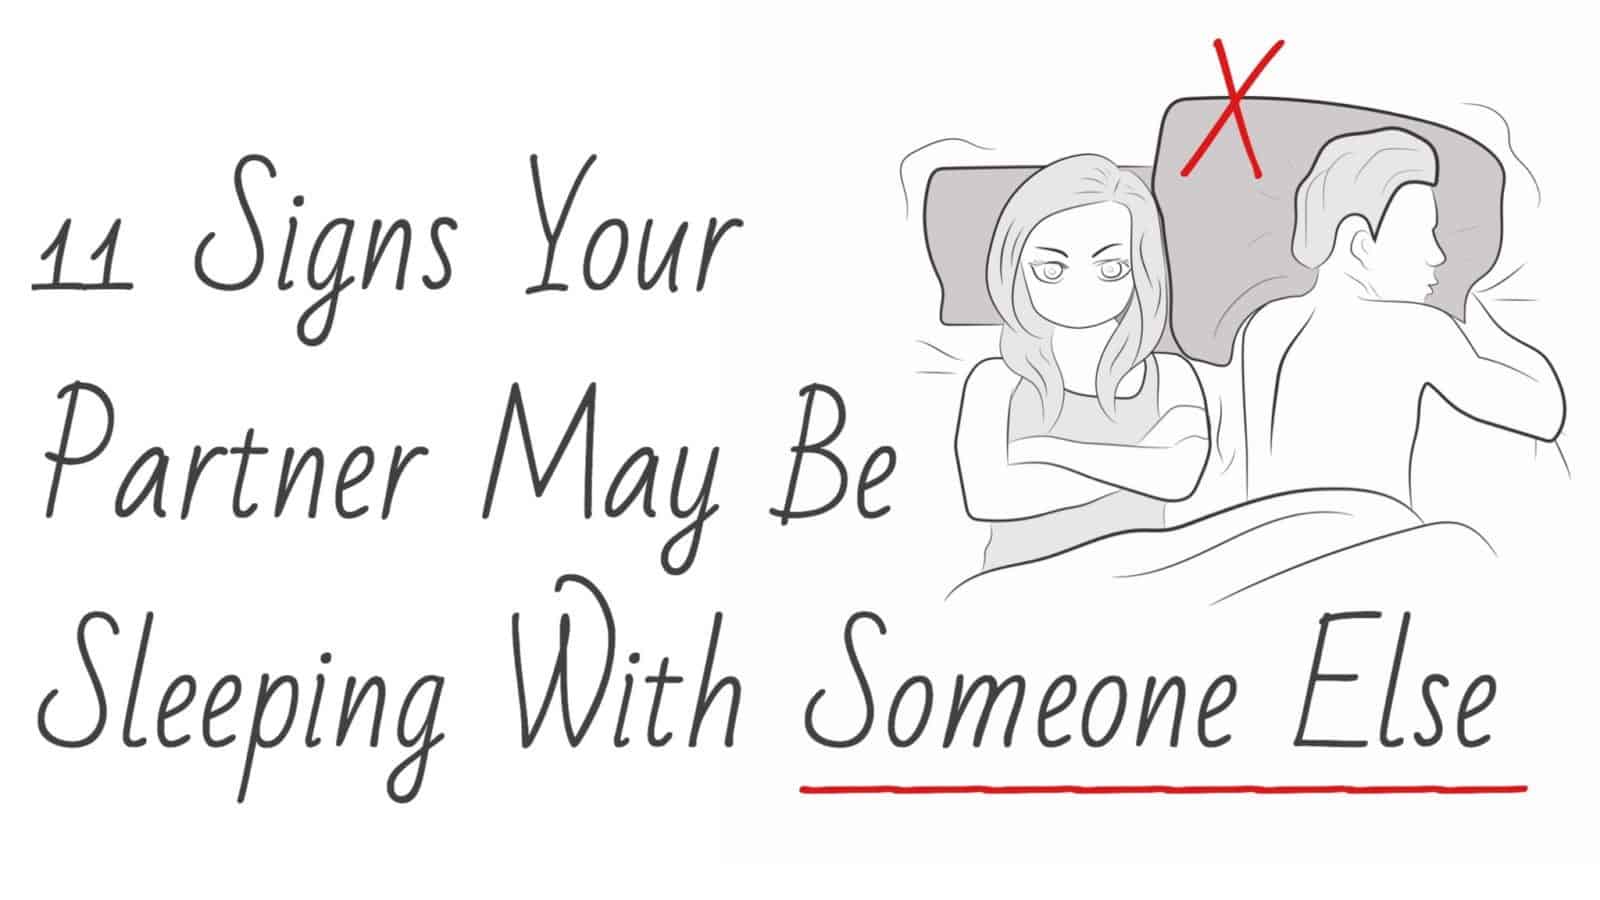 11 Signs Your Partner May Be Sleeping With Someone Else,Coupe Cocktail Glassware